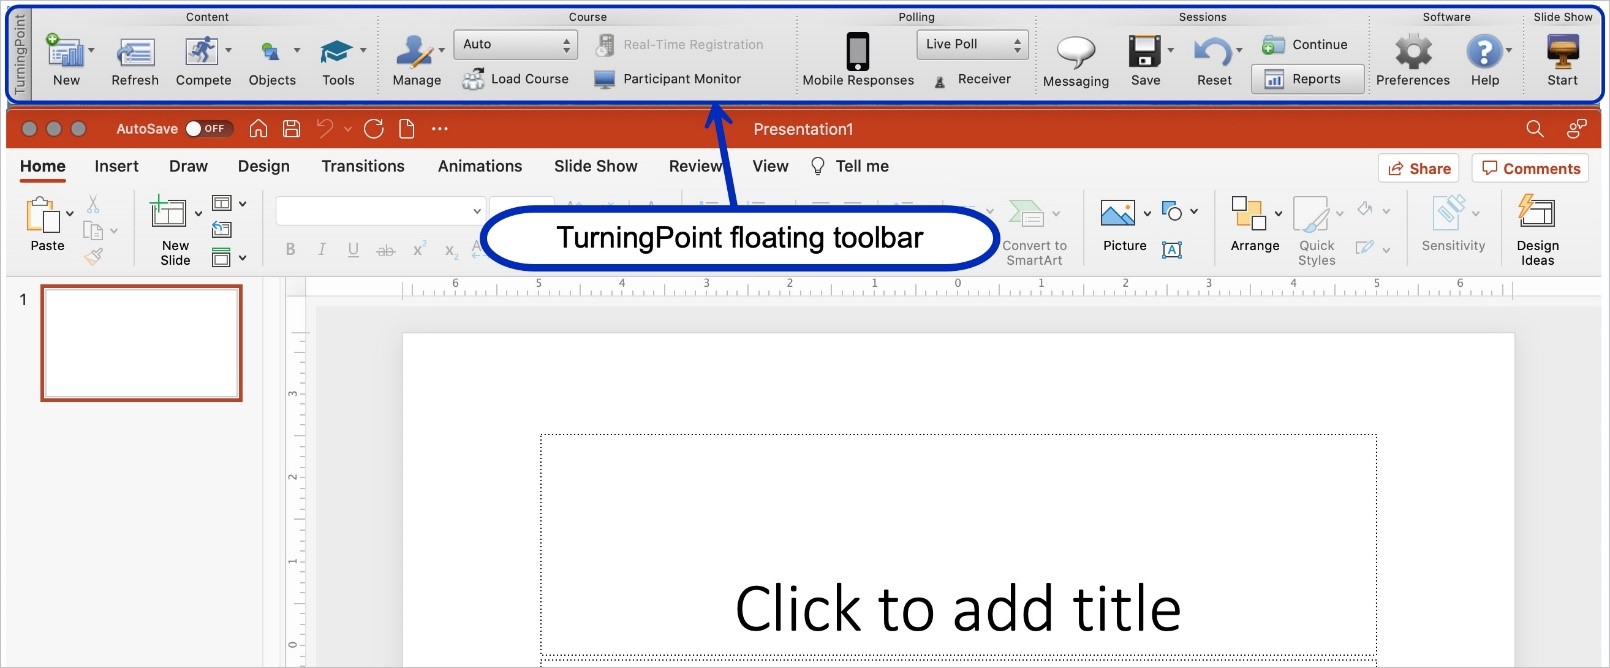 Screenshot of the TurningPoint floating toolbar